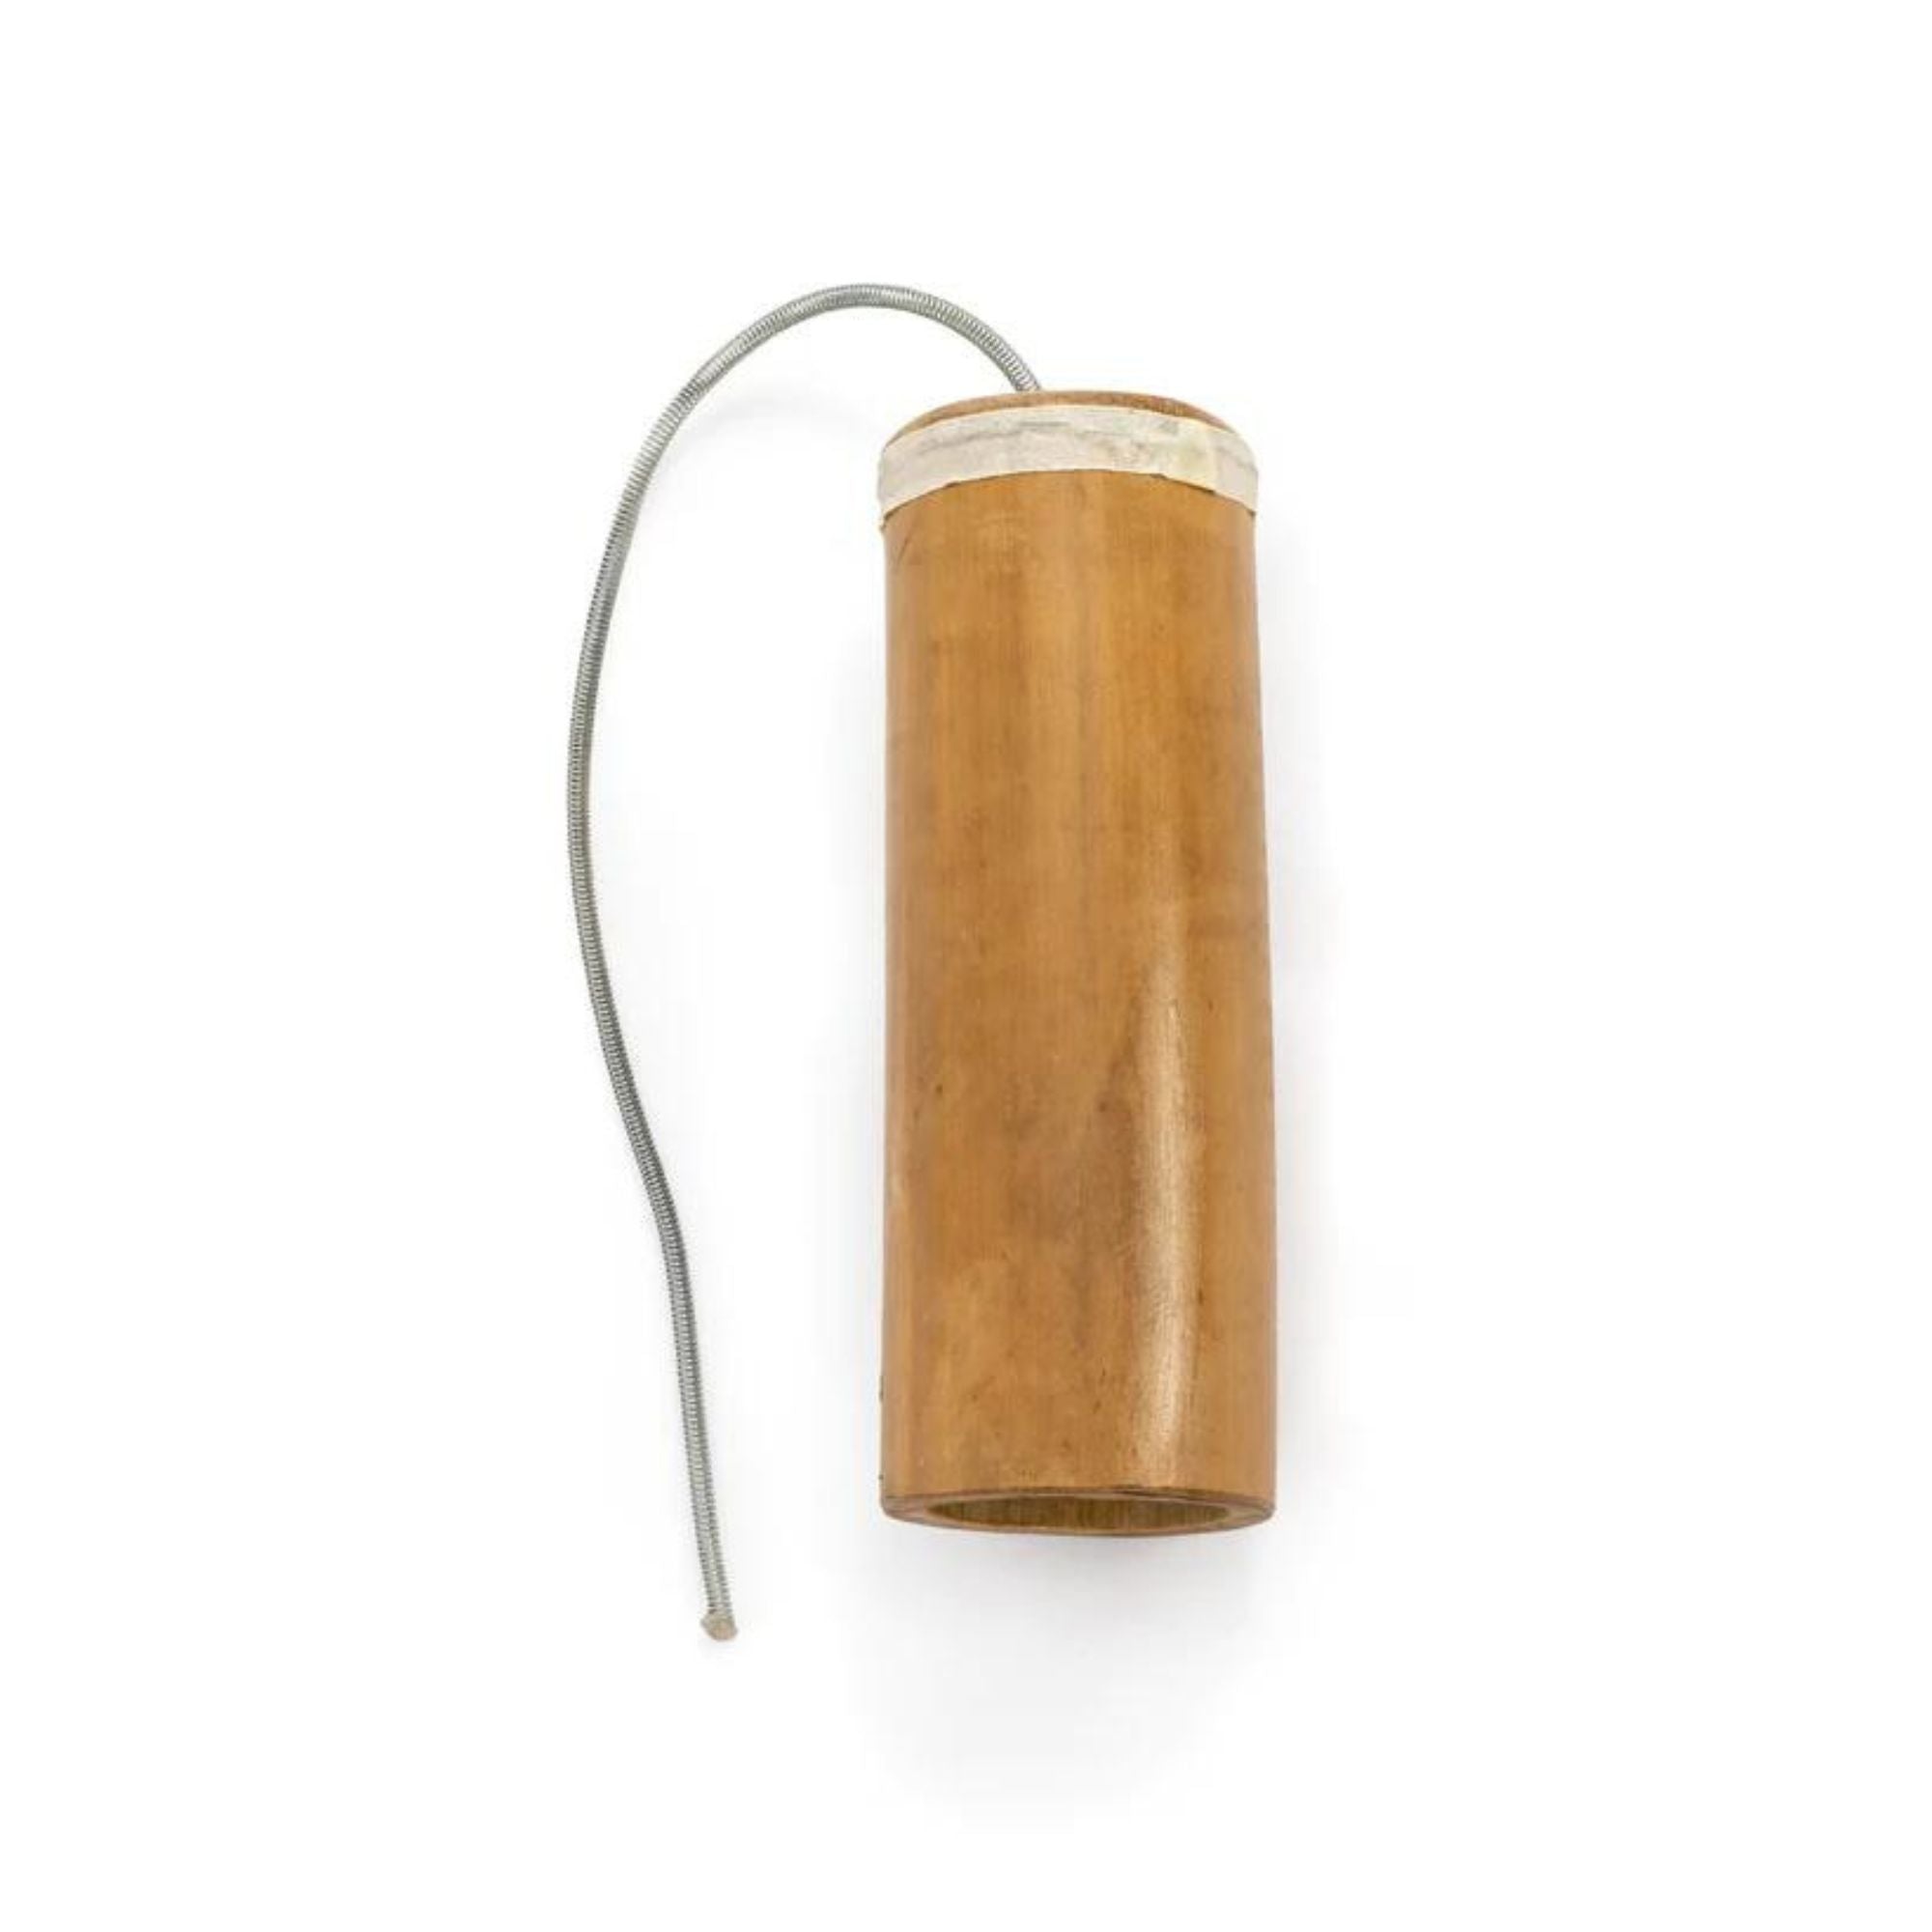 Bamboo thunder drum with metal spring